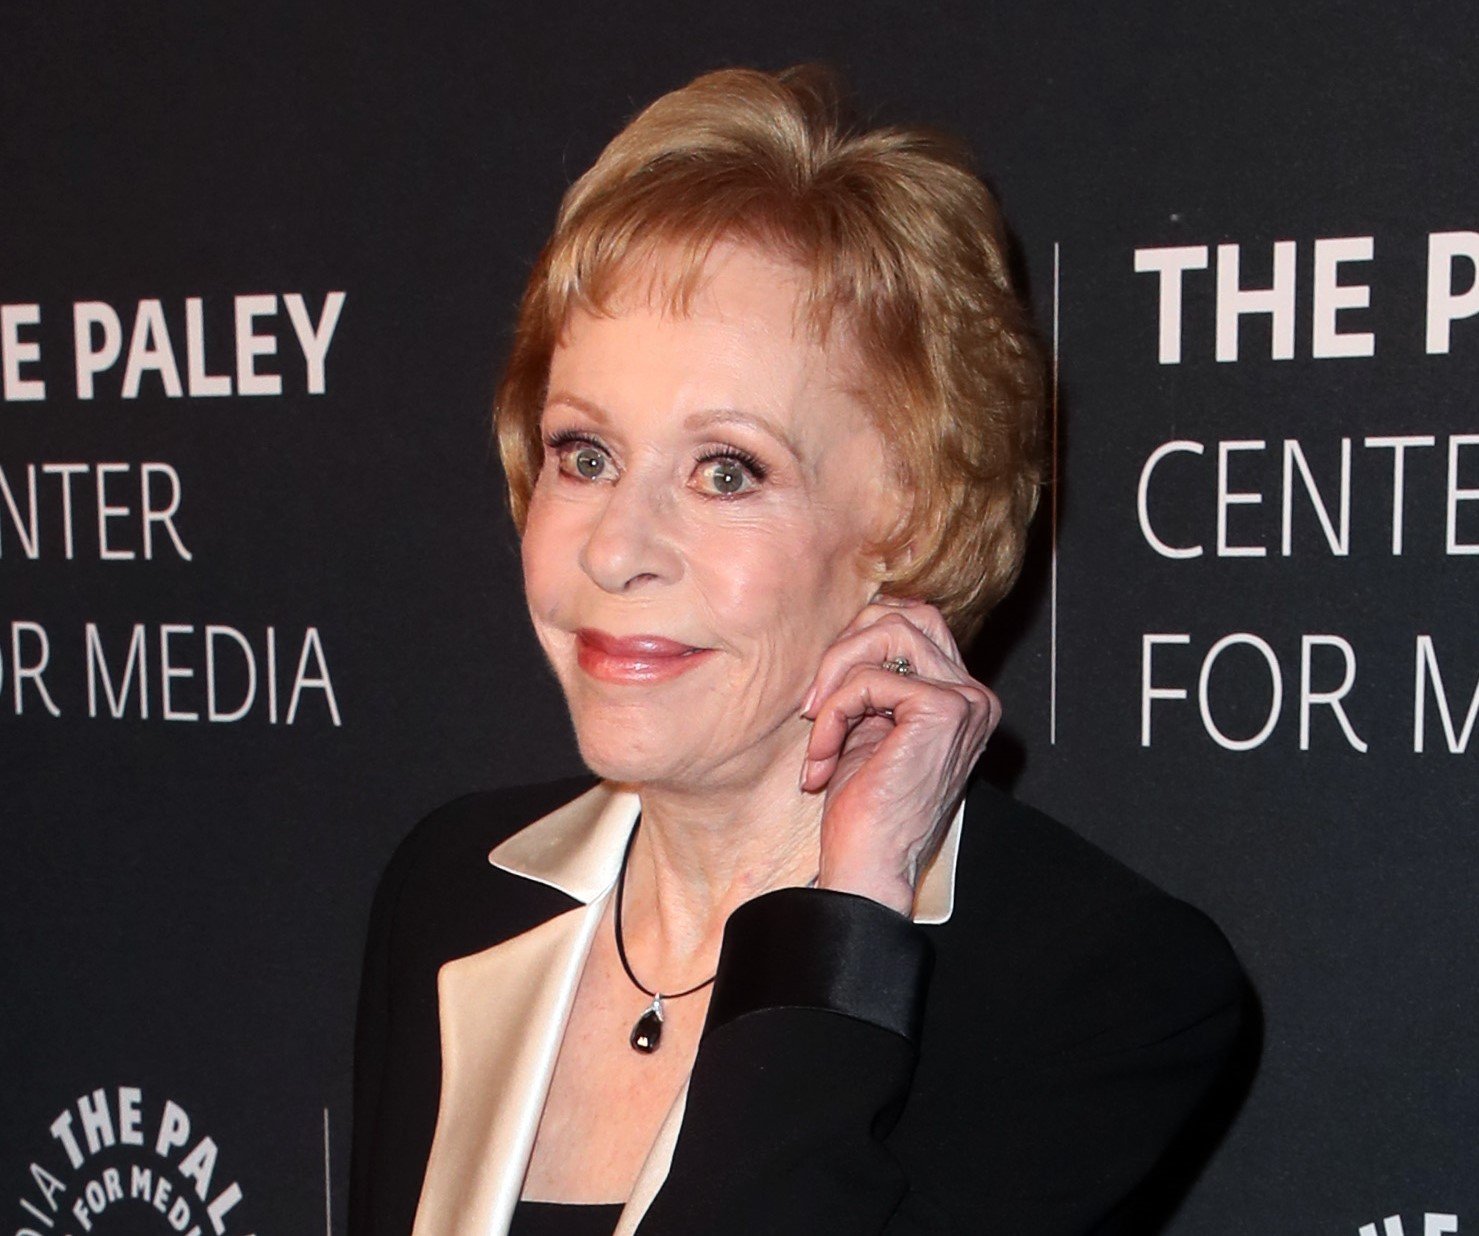 Carol Burnett smiles on red carpet and poses with her hand to her ear